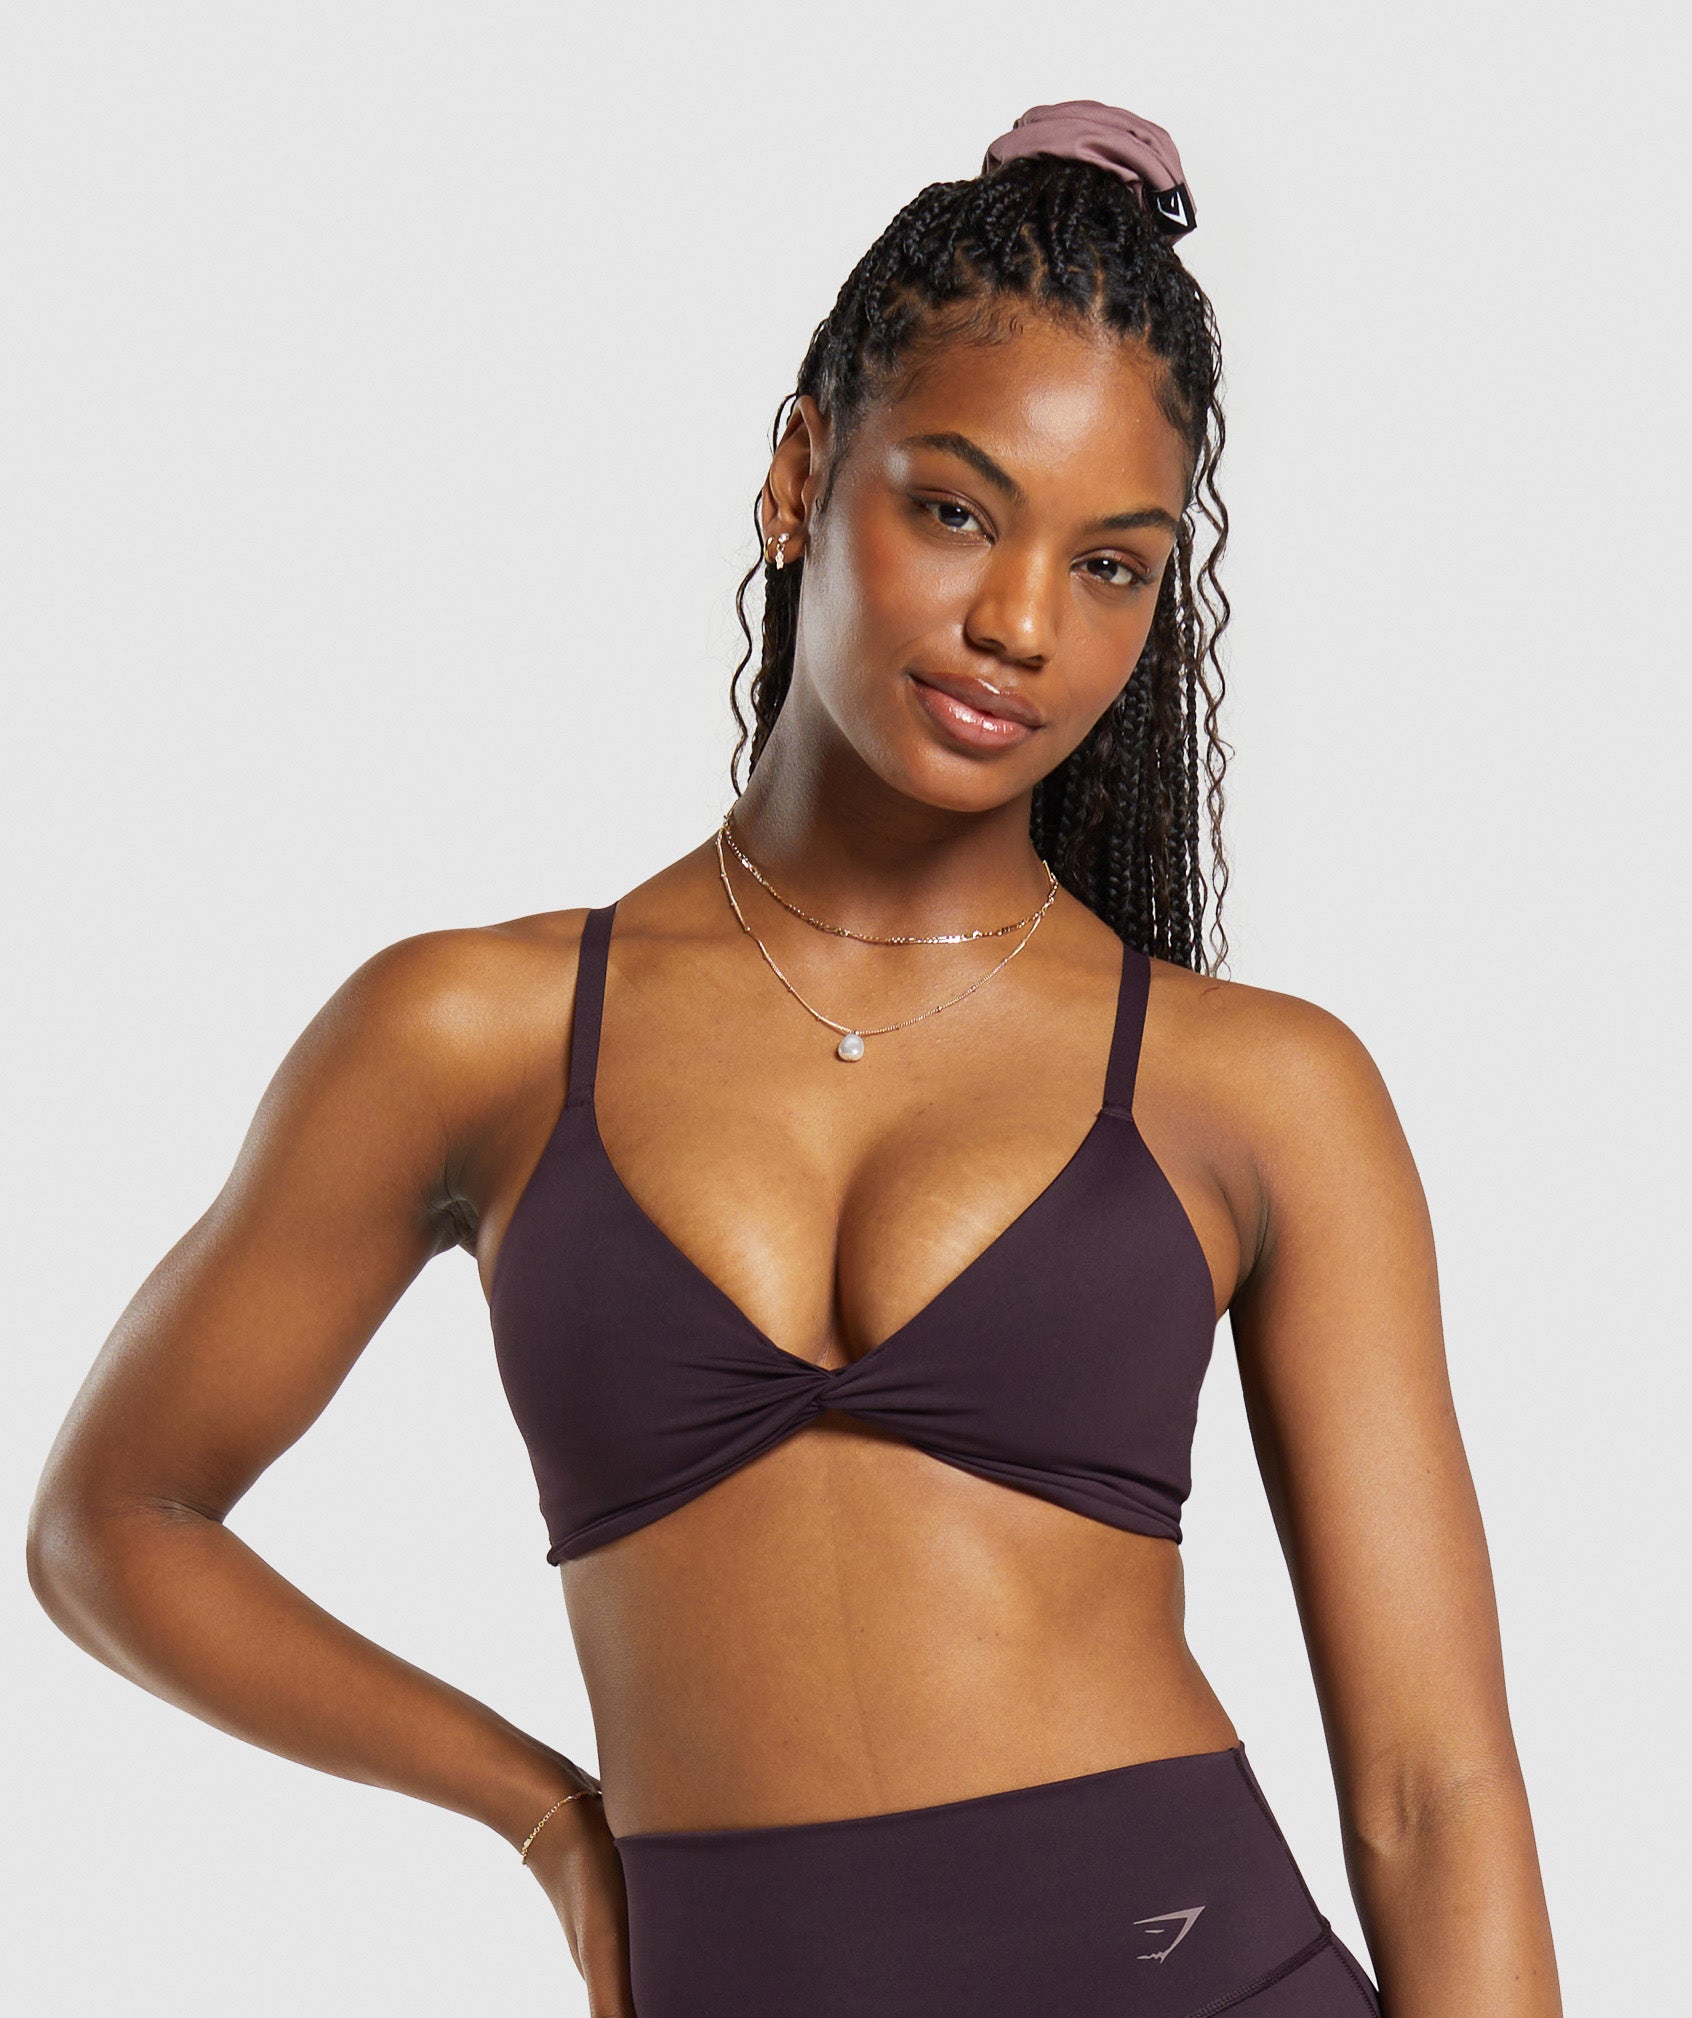 Evolve Multiway Twist Front Sports Bra in Teal Green